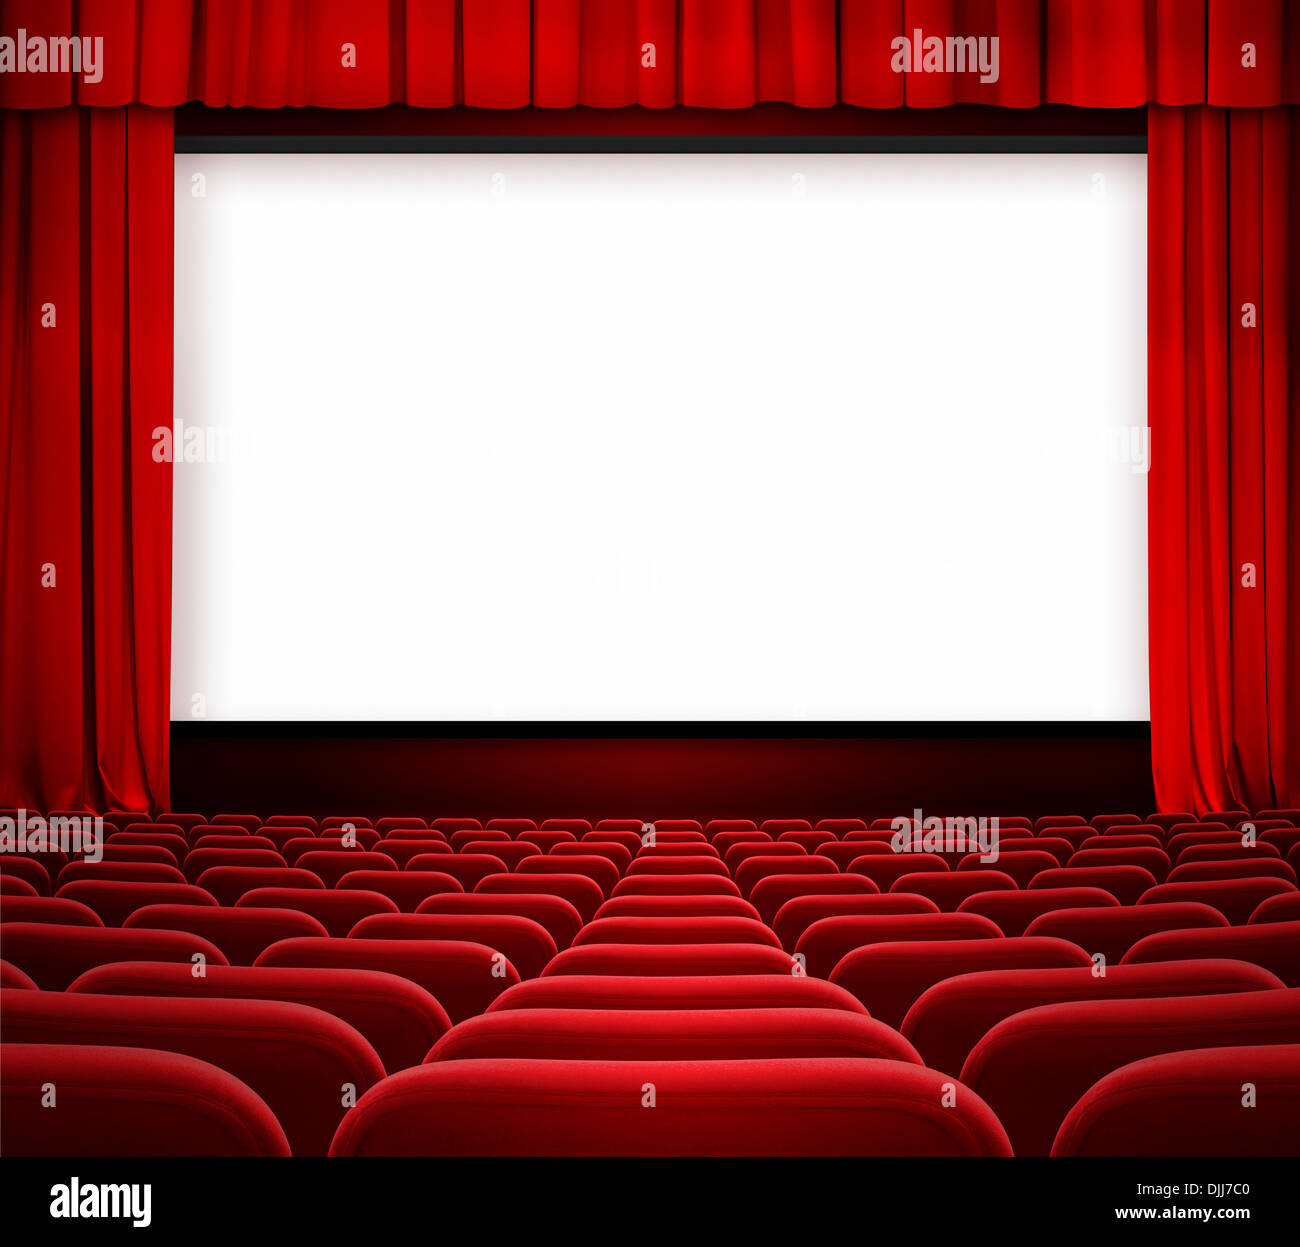 cinema screen with open curtain and red seats Stock Photo